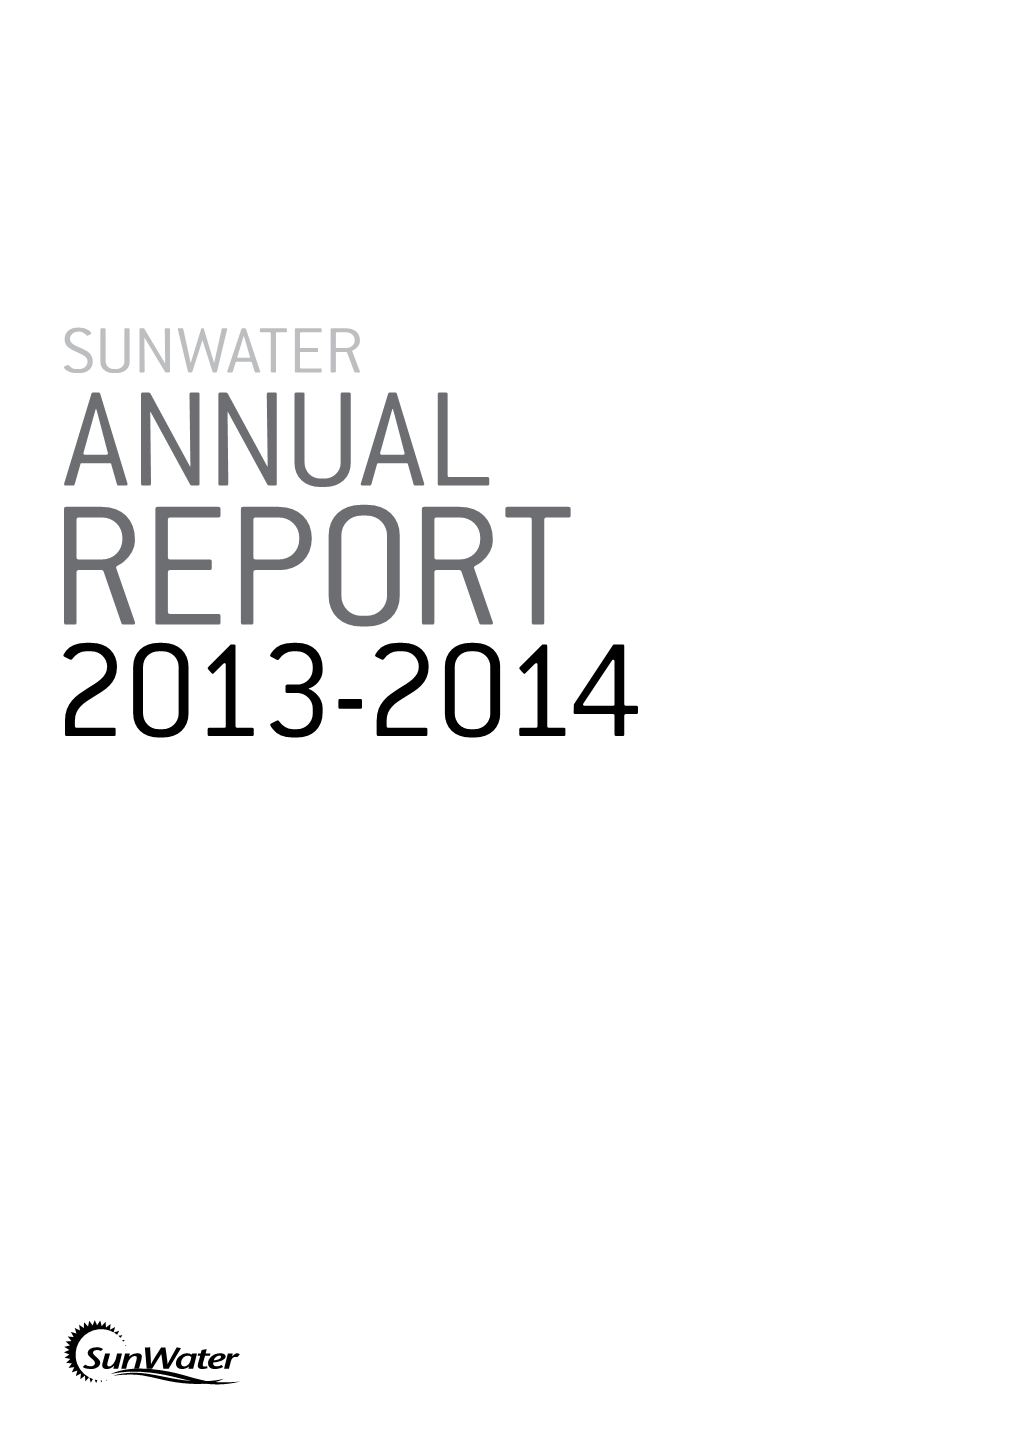 Sunwater Annual Report 2013-2014